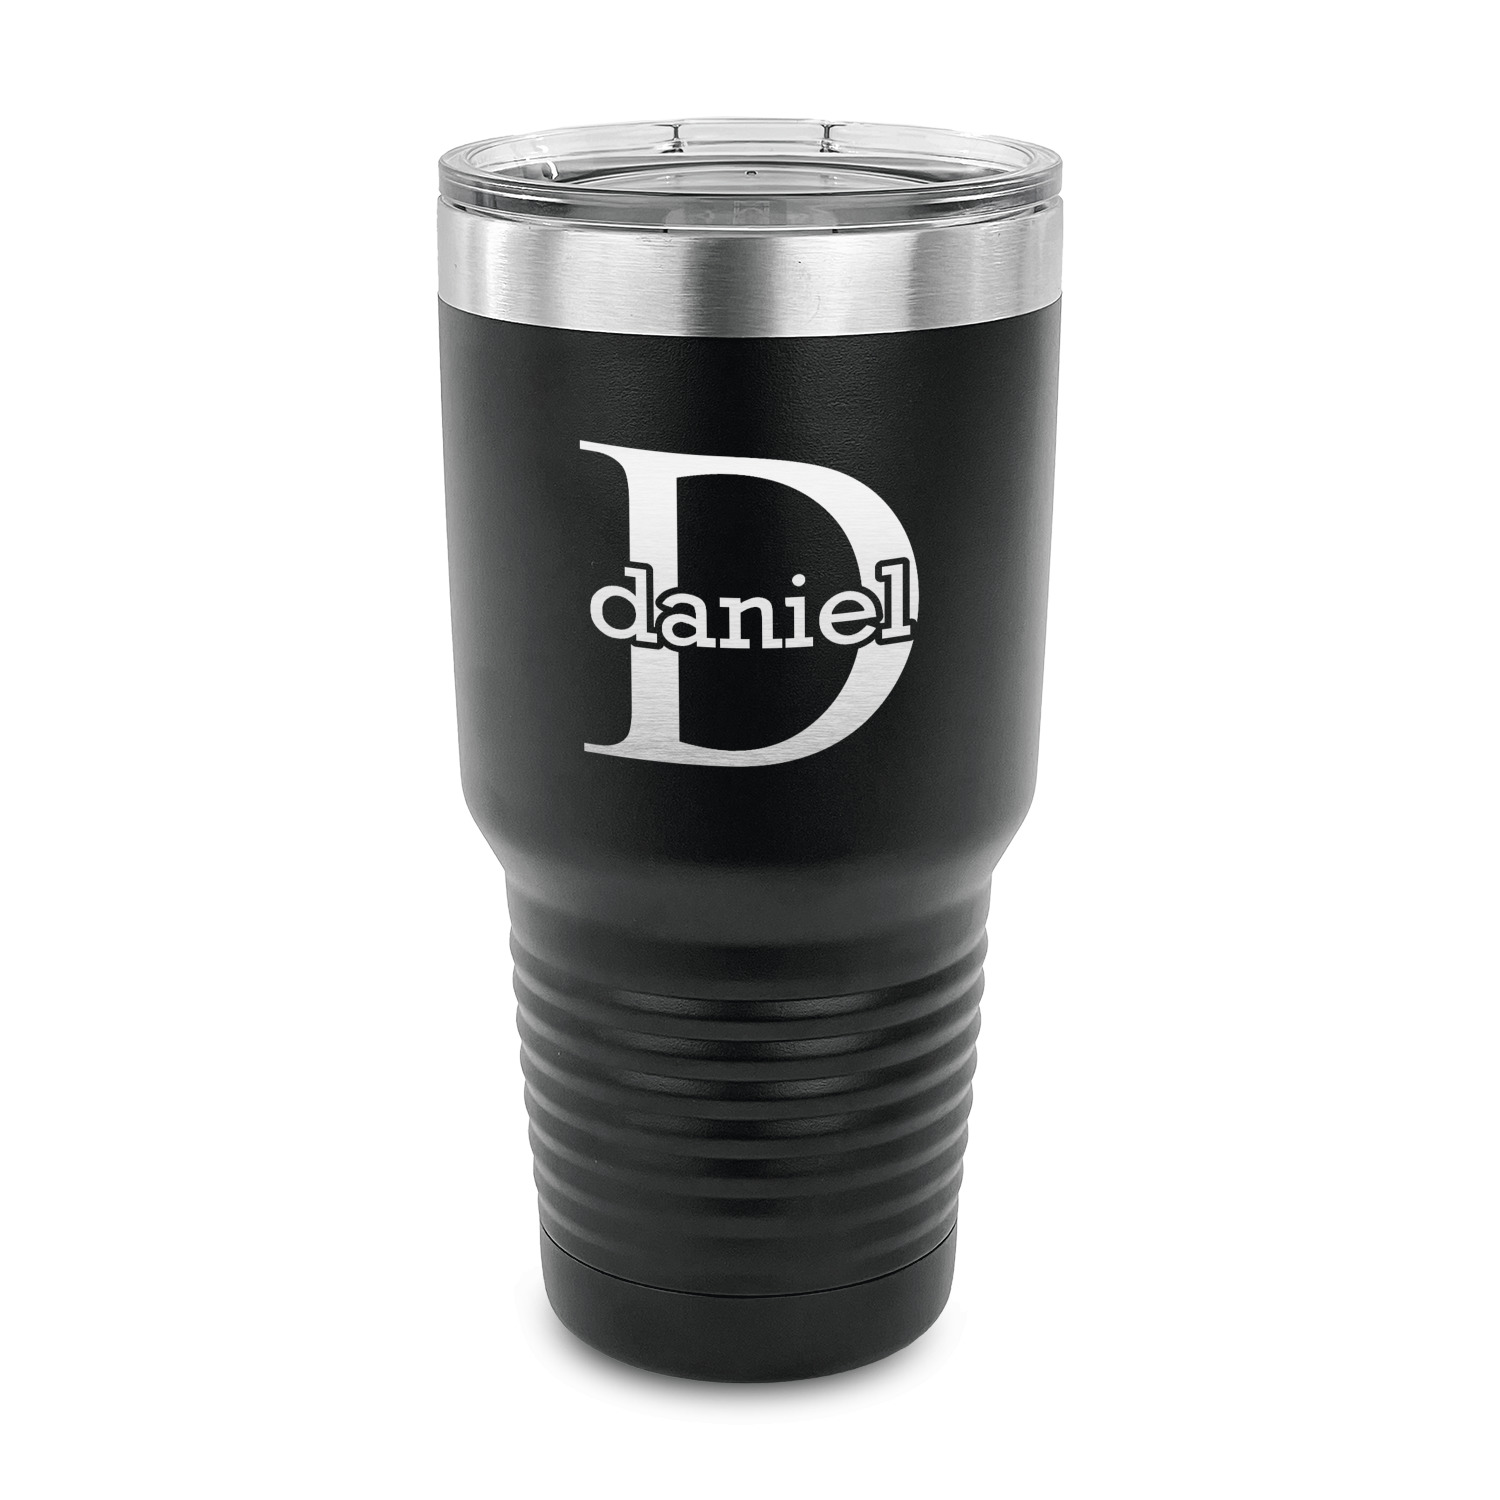 https://www.youcustomizeit.com/common/MAKE/837778/Name-Initial-for-Guys-30-oz-Stainless-Steel-Ringneck-Tumblers-Black-FRONT.jpg?lm=1655151864